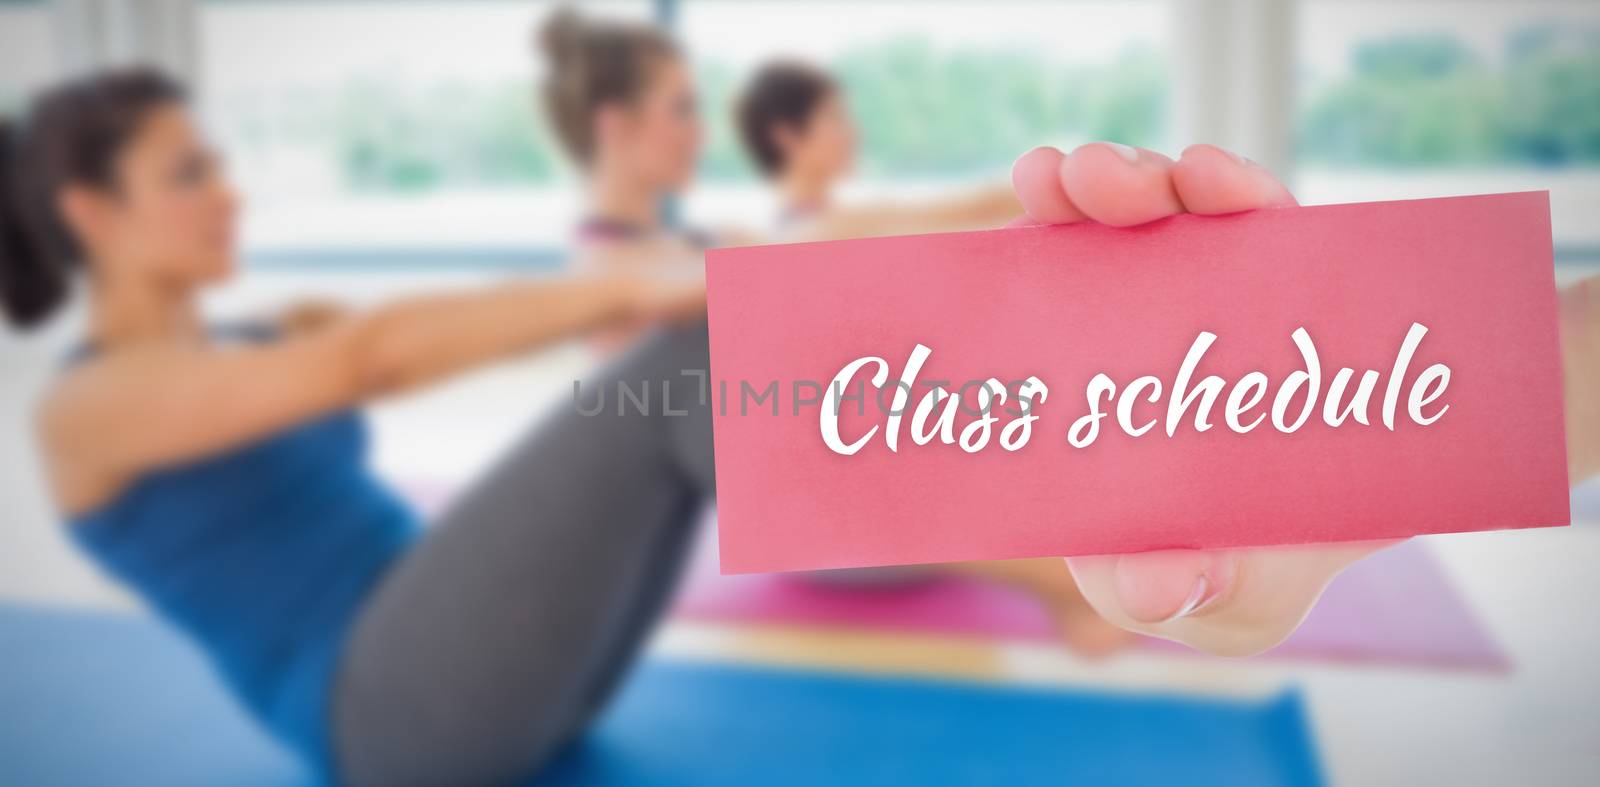 The word class schedule and hand showing card against 